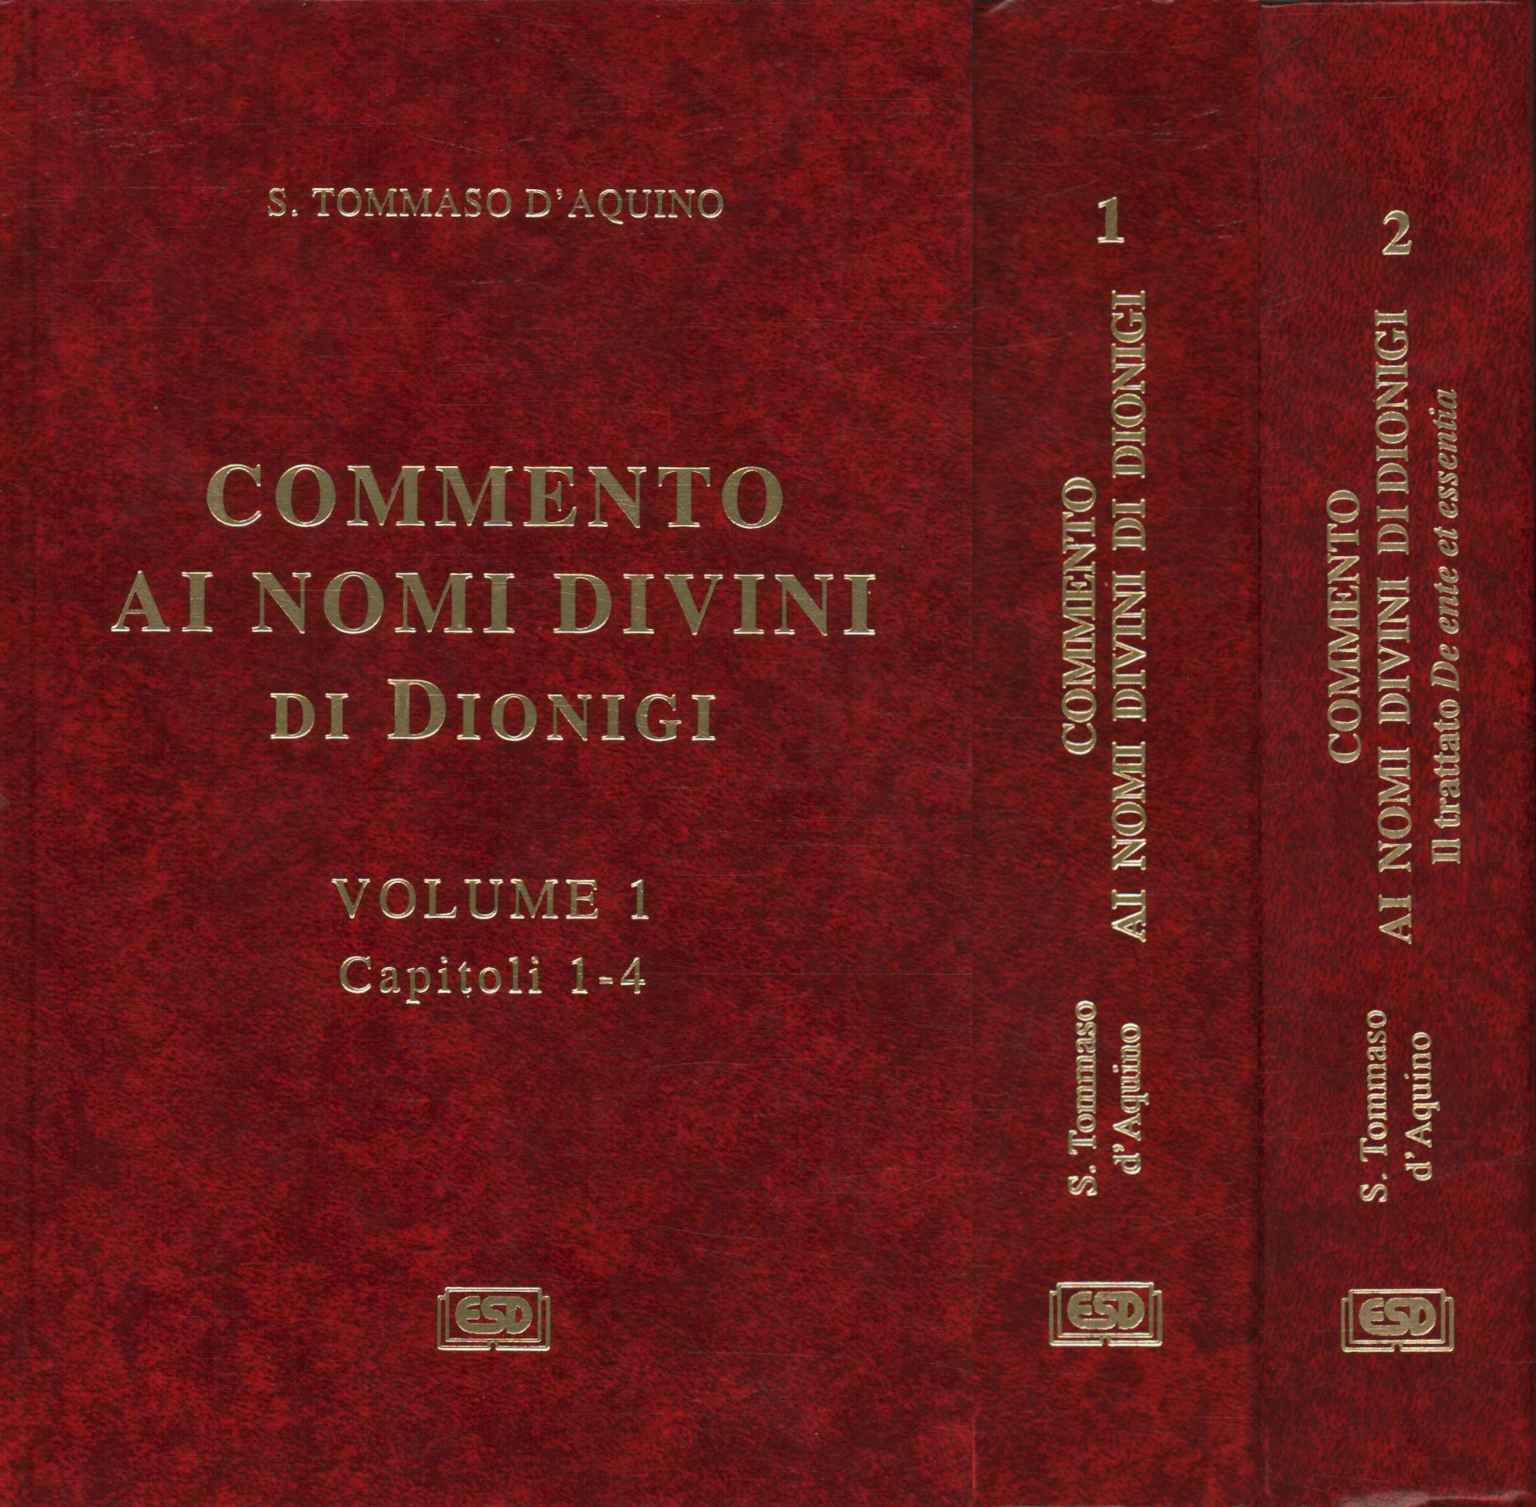 Commentary on the divine names of Dionysius (2%,Commentary on the divine names of Dionysius (2%,Commentary on the divine names of Dionysius (2%),Commentary on the divine names of Dionysius (2%